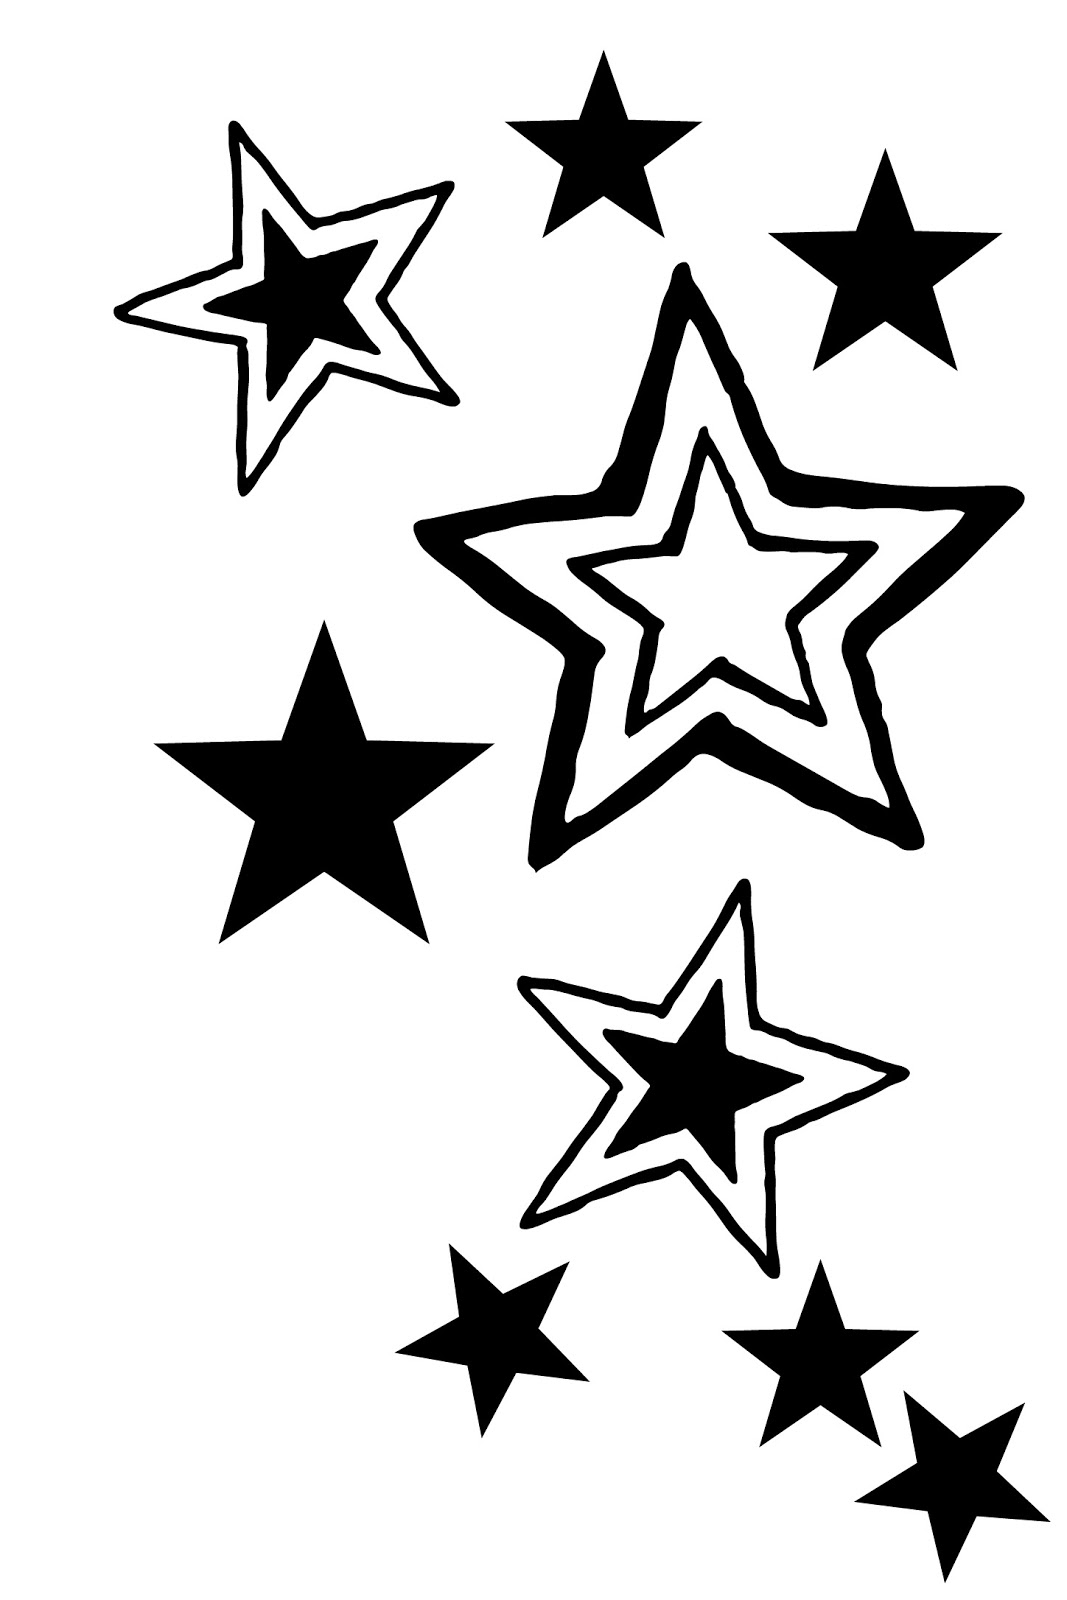 Best Photos of Mini Star Template - Small Star Cut Out Template ...